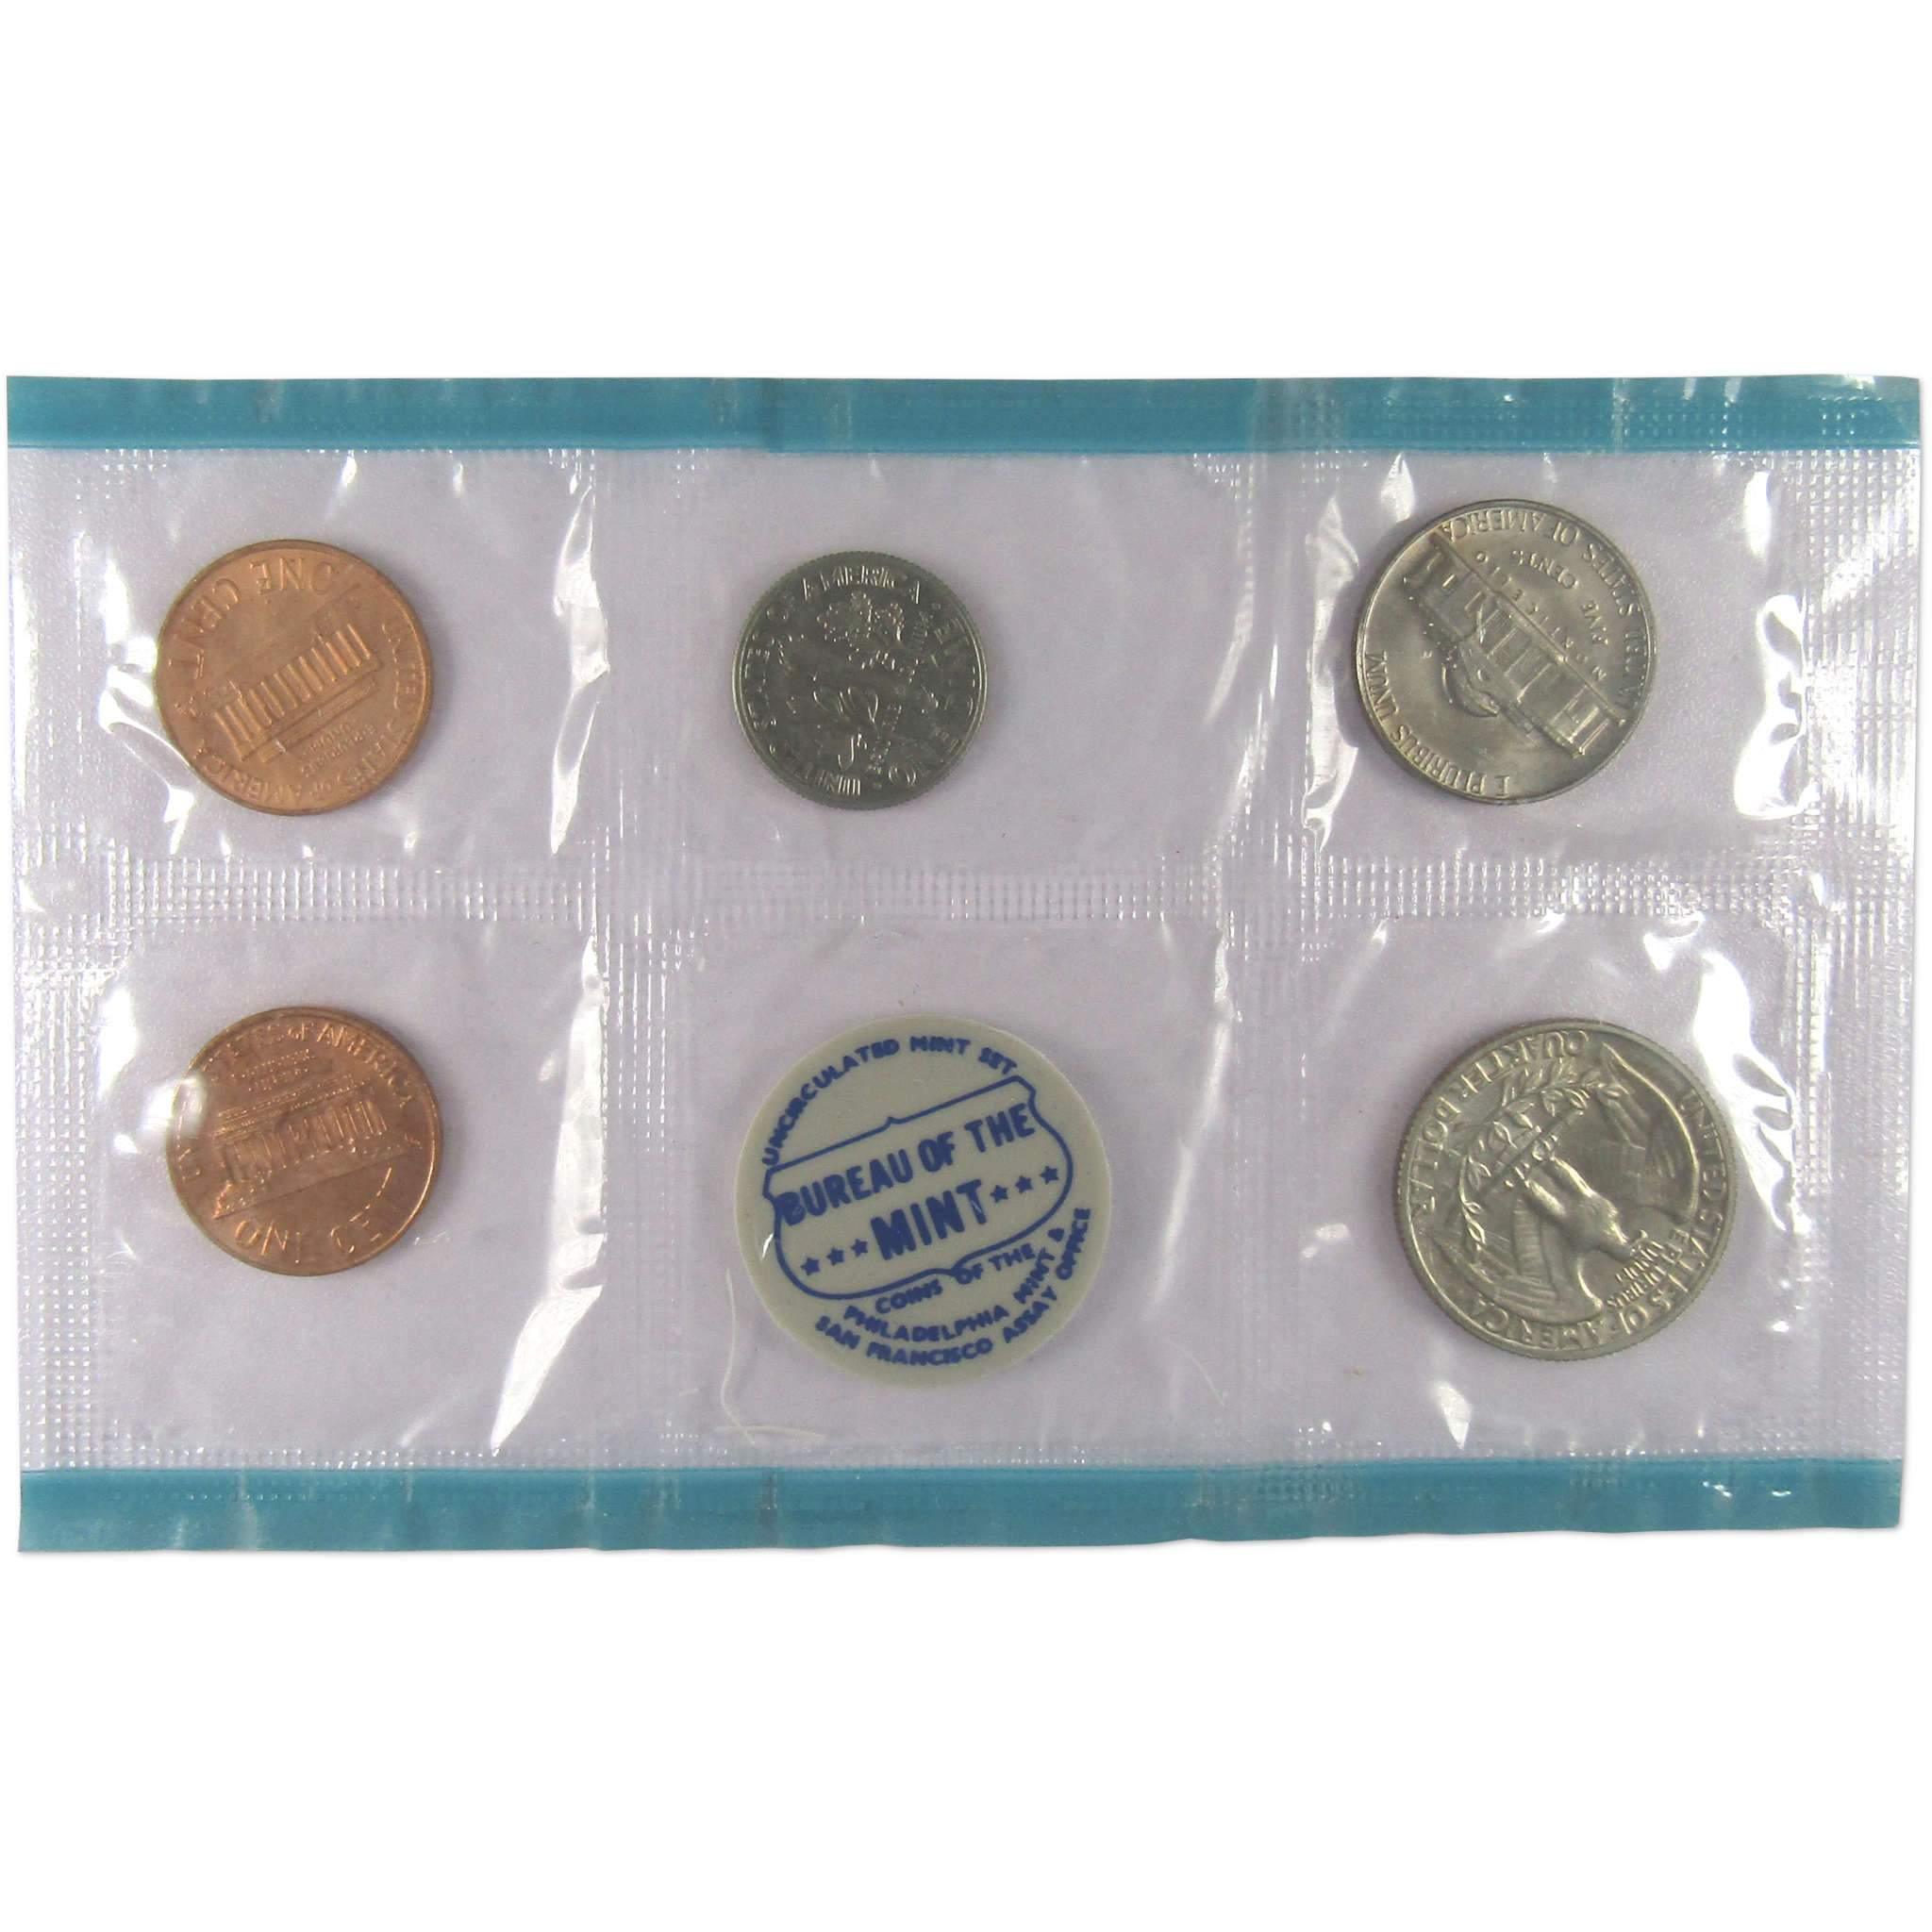 1968 U.S. Mint Set Uncirculated Original Government Packaging OGP Collectible